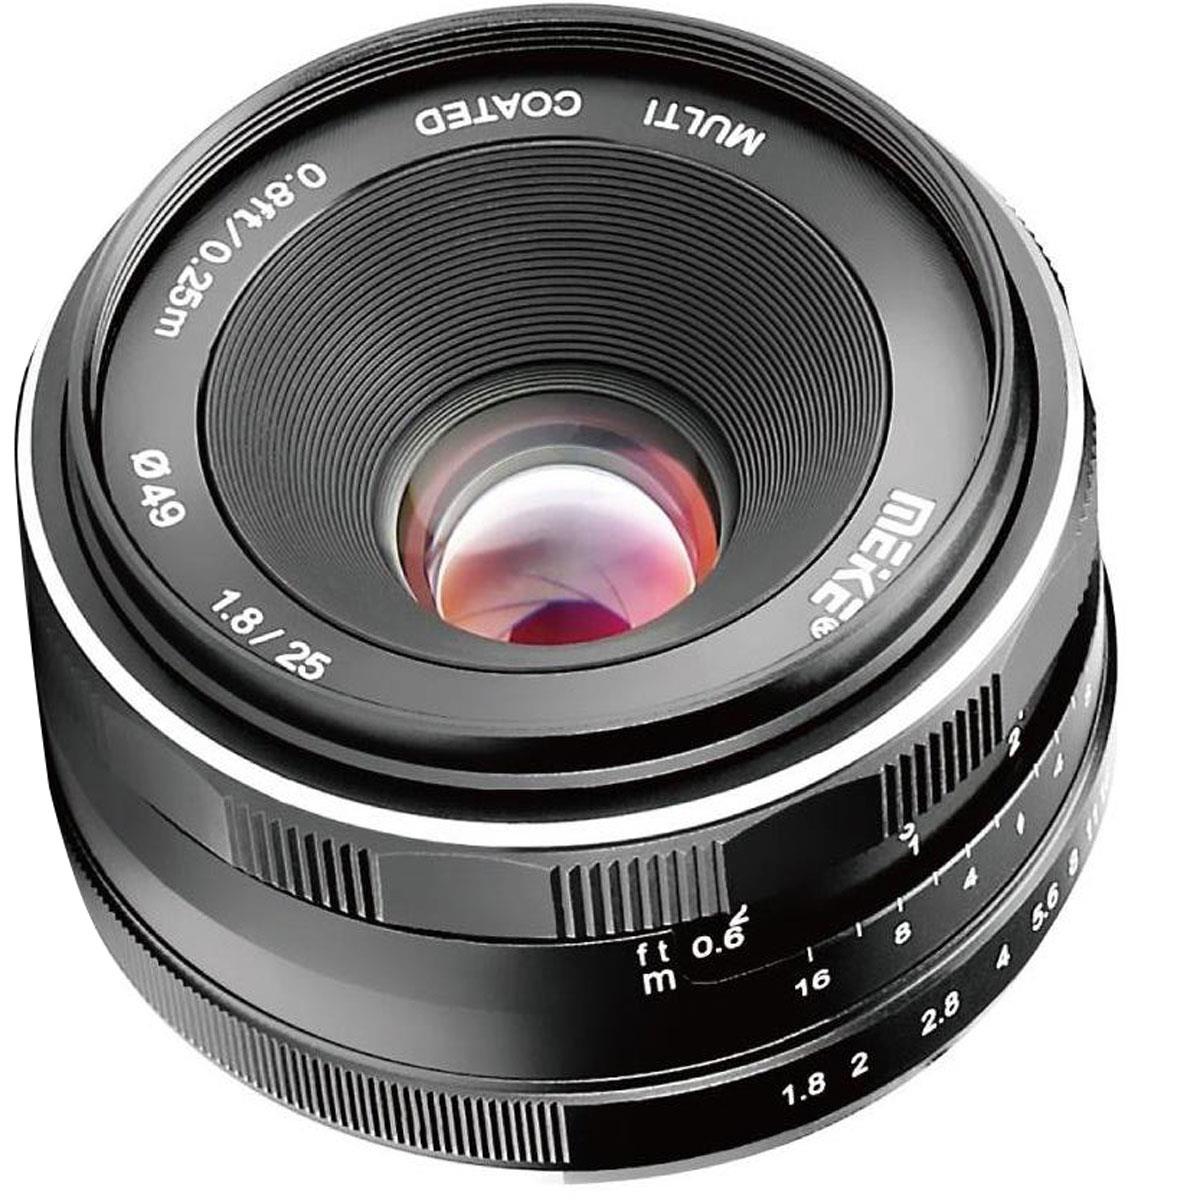 Image of Meike 25mm f/1.8 Lens for Micro Four Thirds